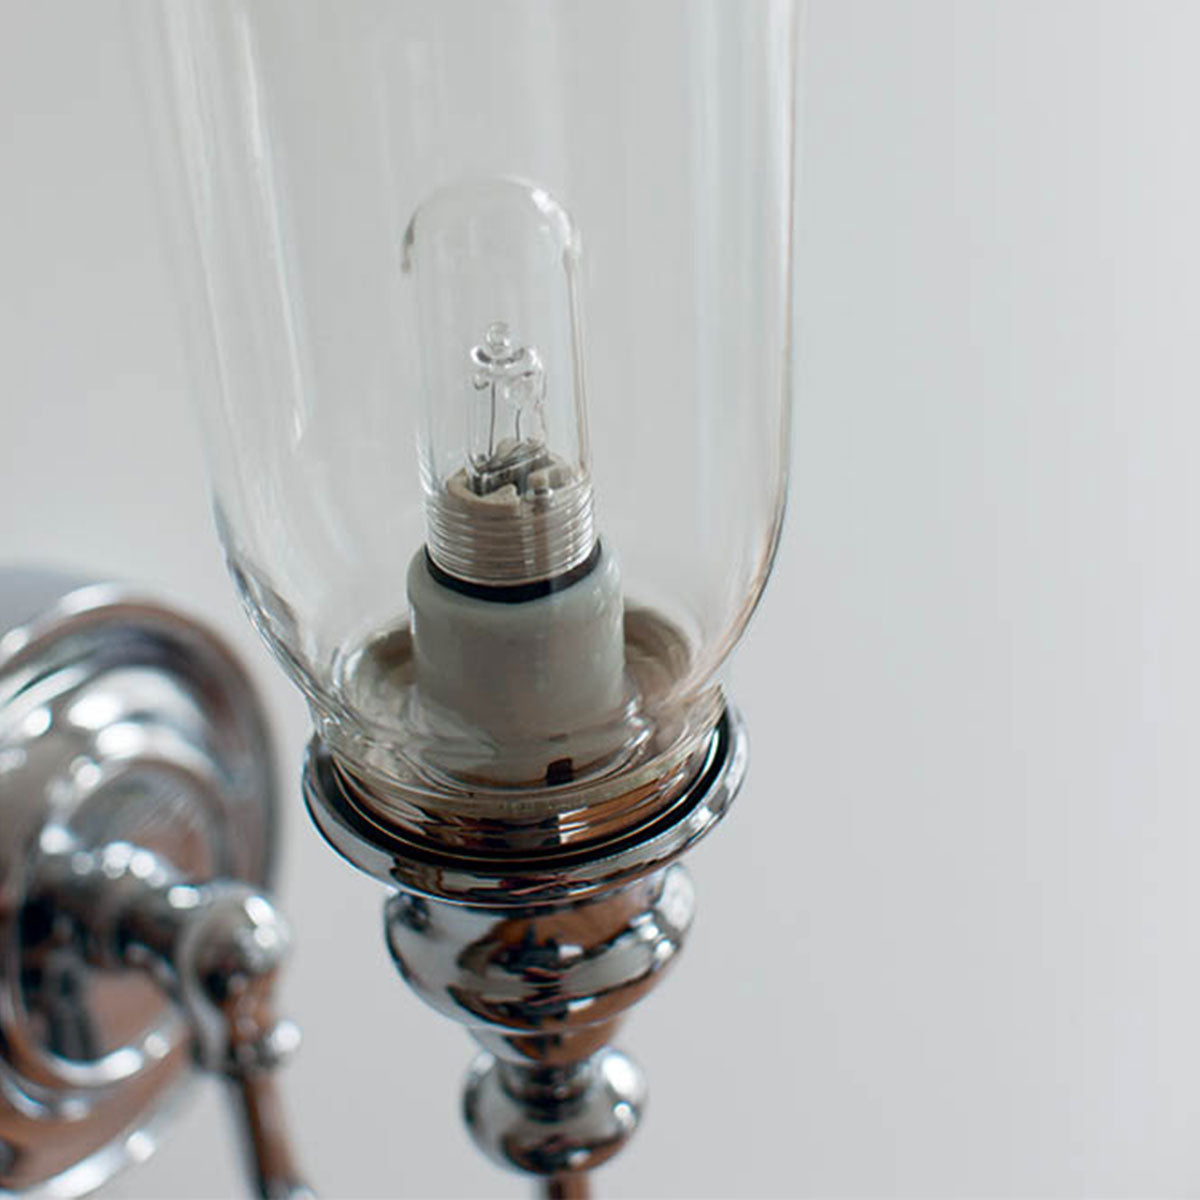 Burlington Ornate Light with Chrome Base and Vase Clear Glass Shade Feature Deluxe Bathrooms Ireland